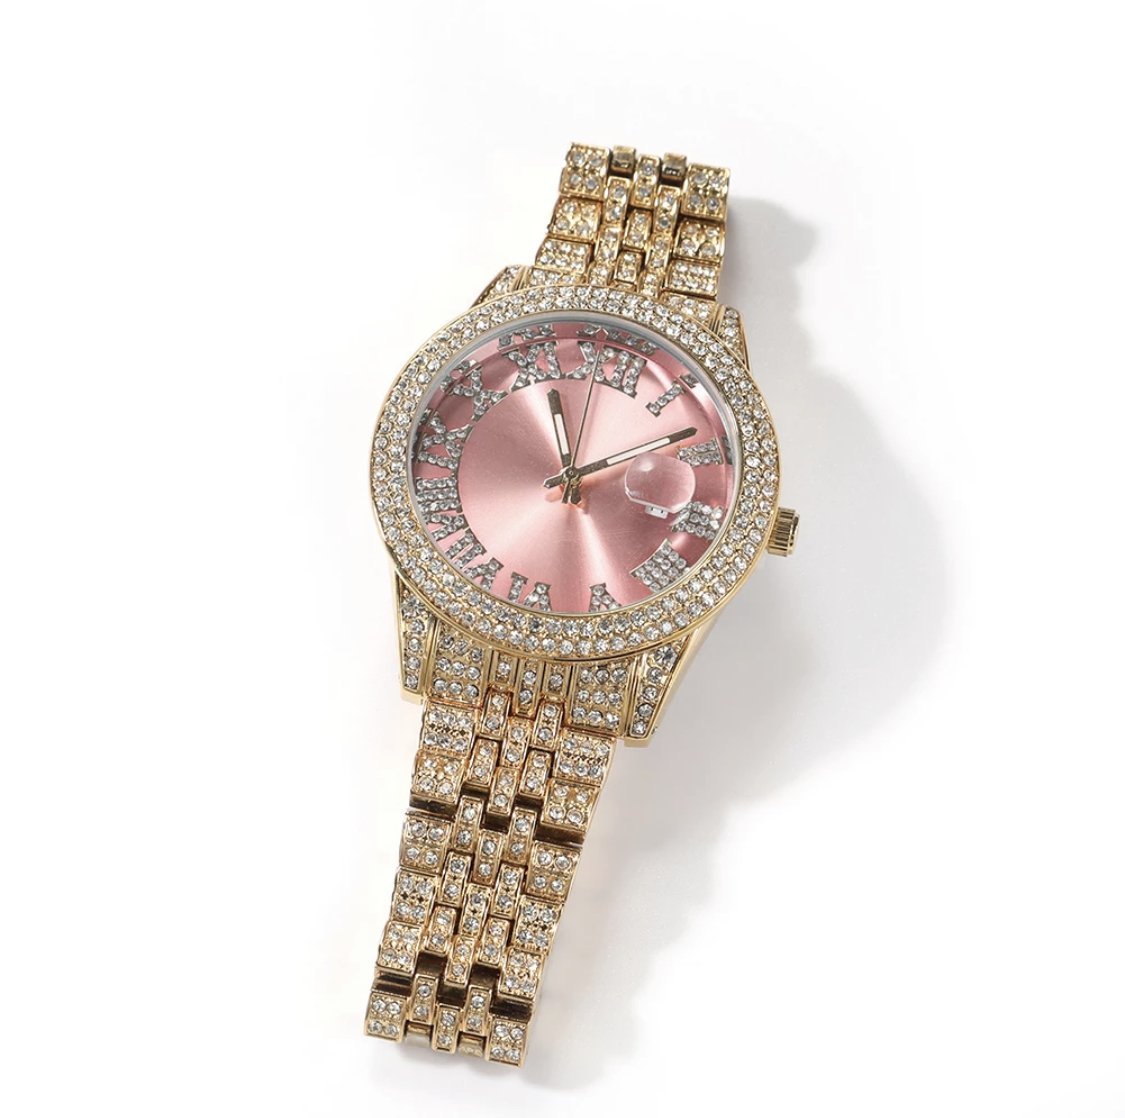 Icy Girl Watch - Pink/Gold - Bedazzle Baddie